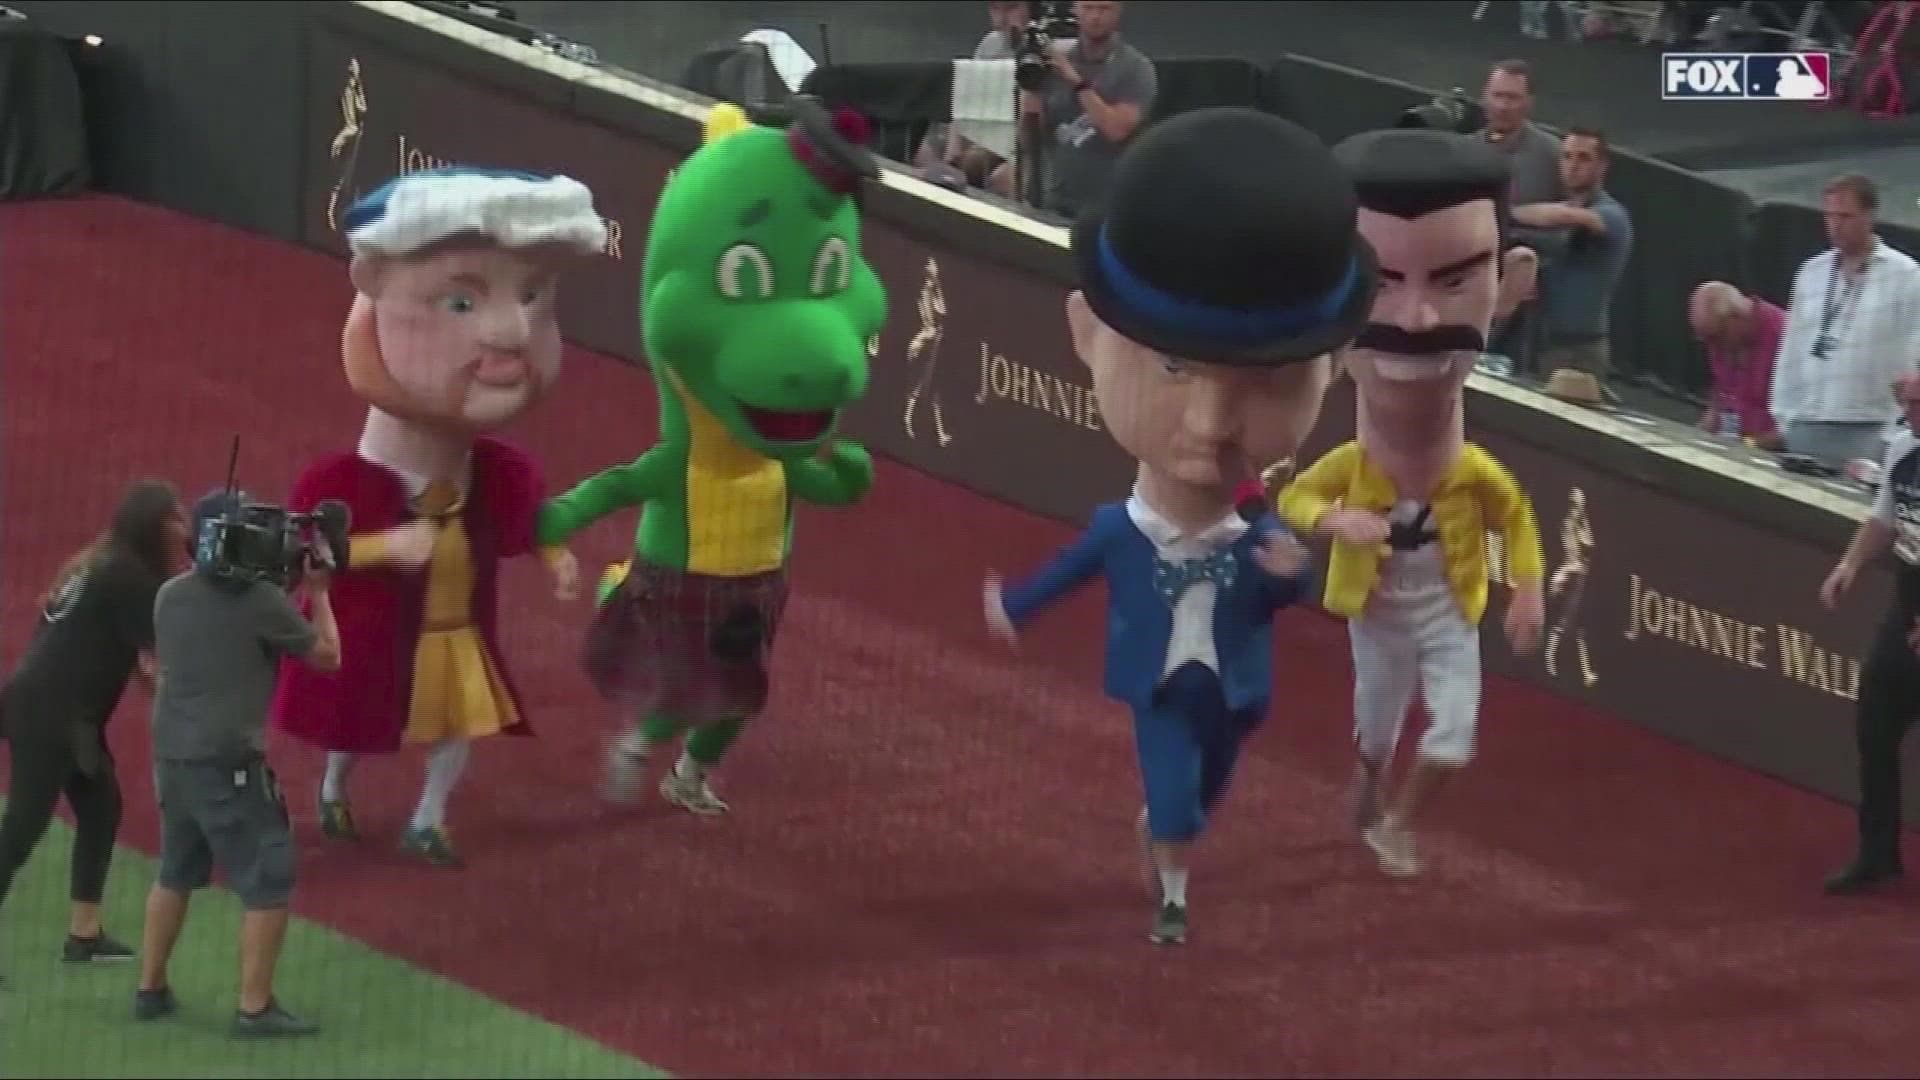 Great mascot race depicting English settlers ends in a tumble at MLB game.